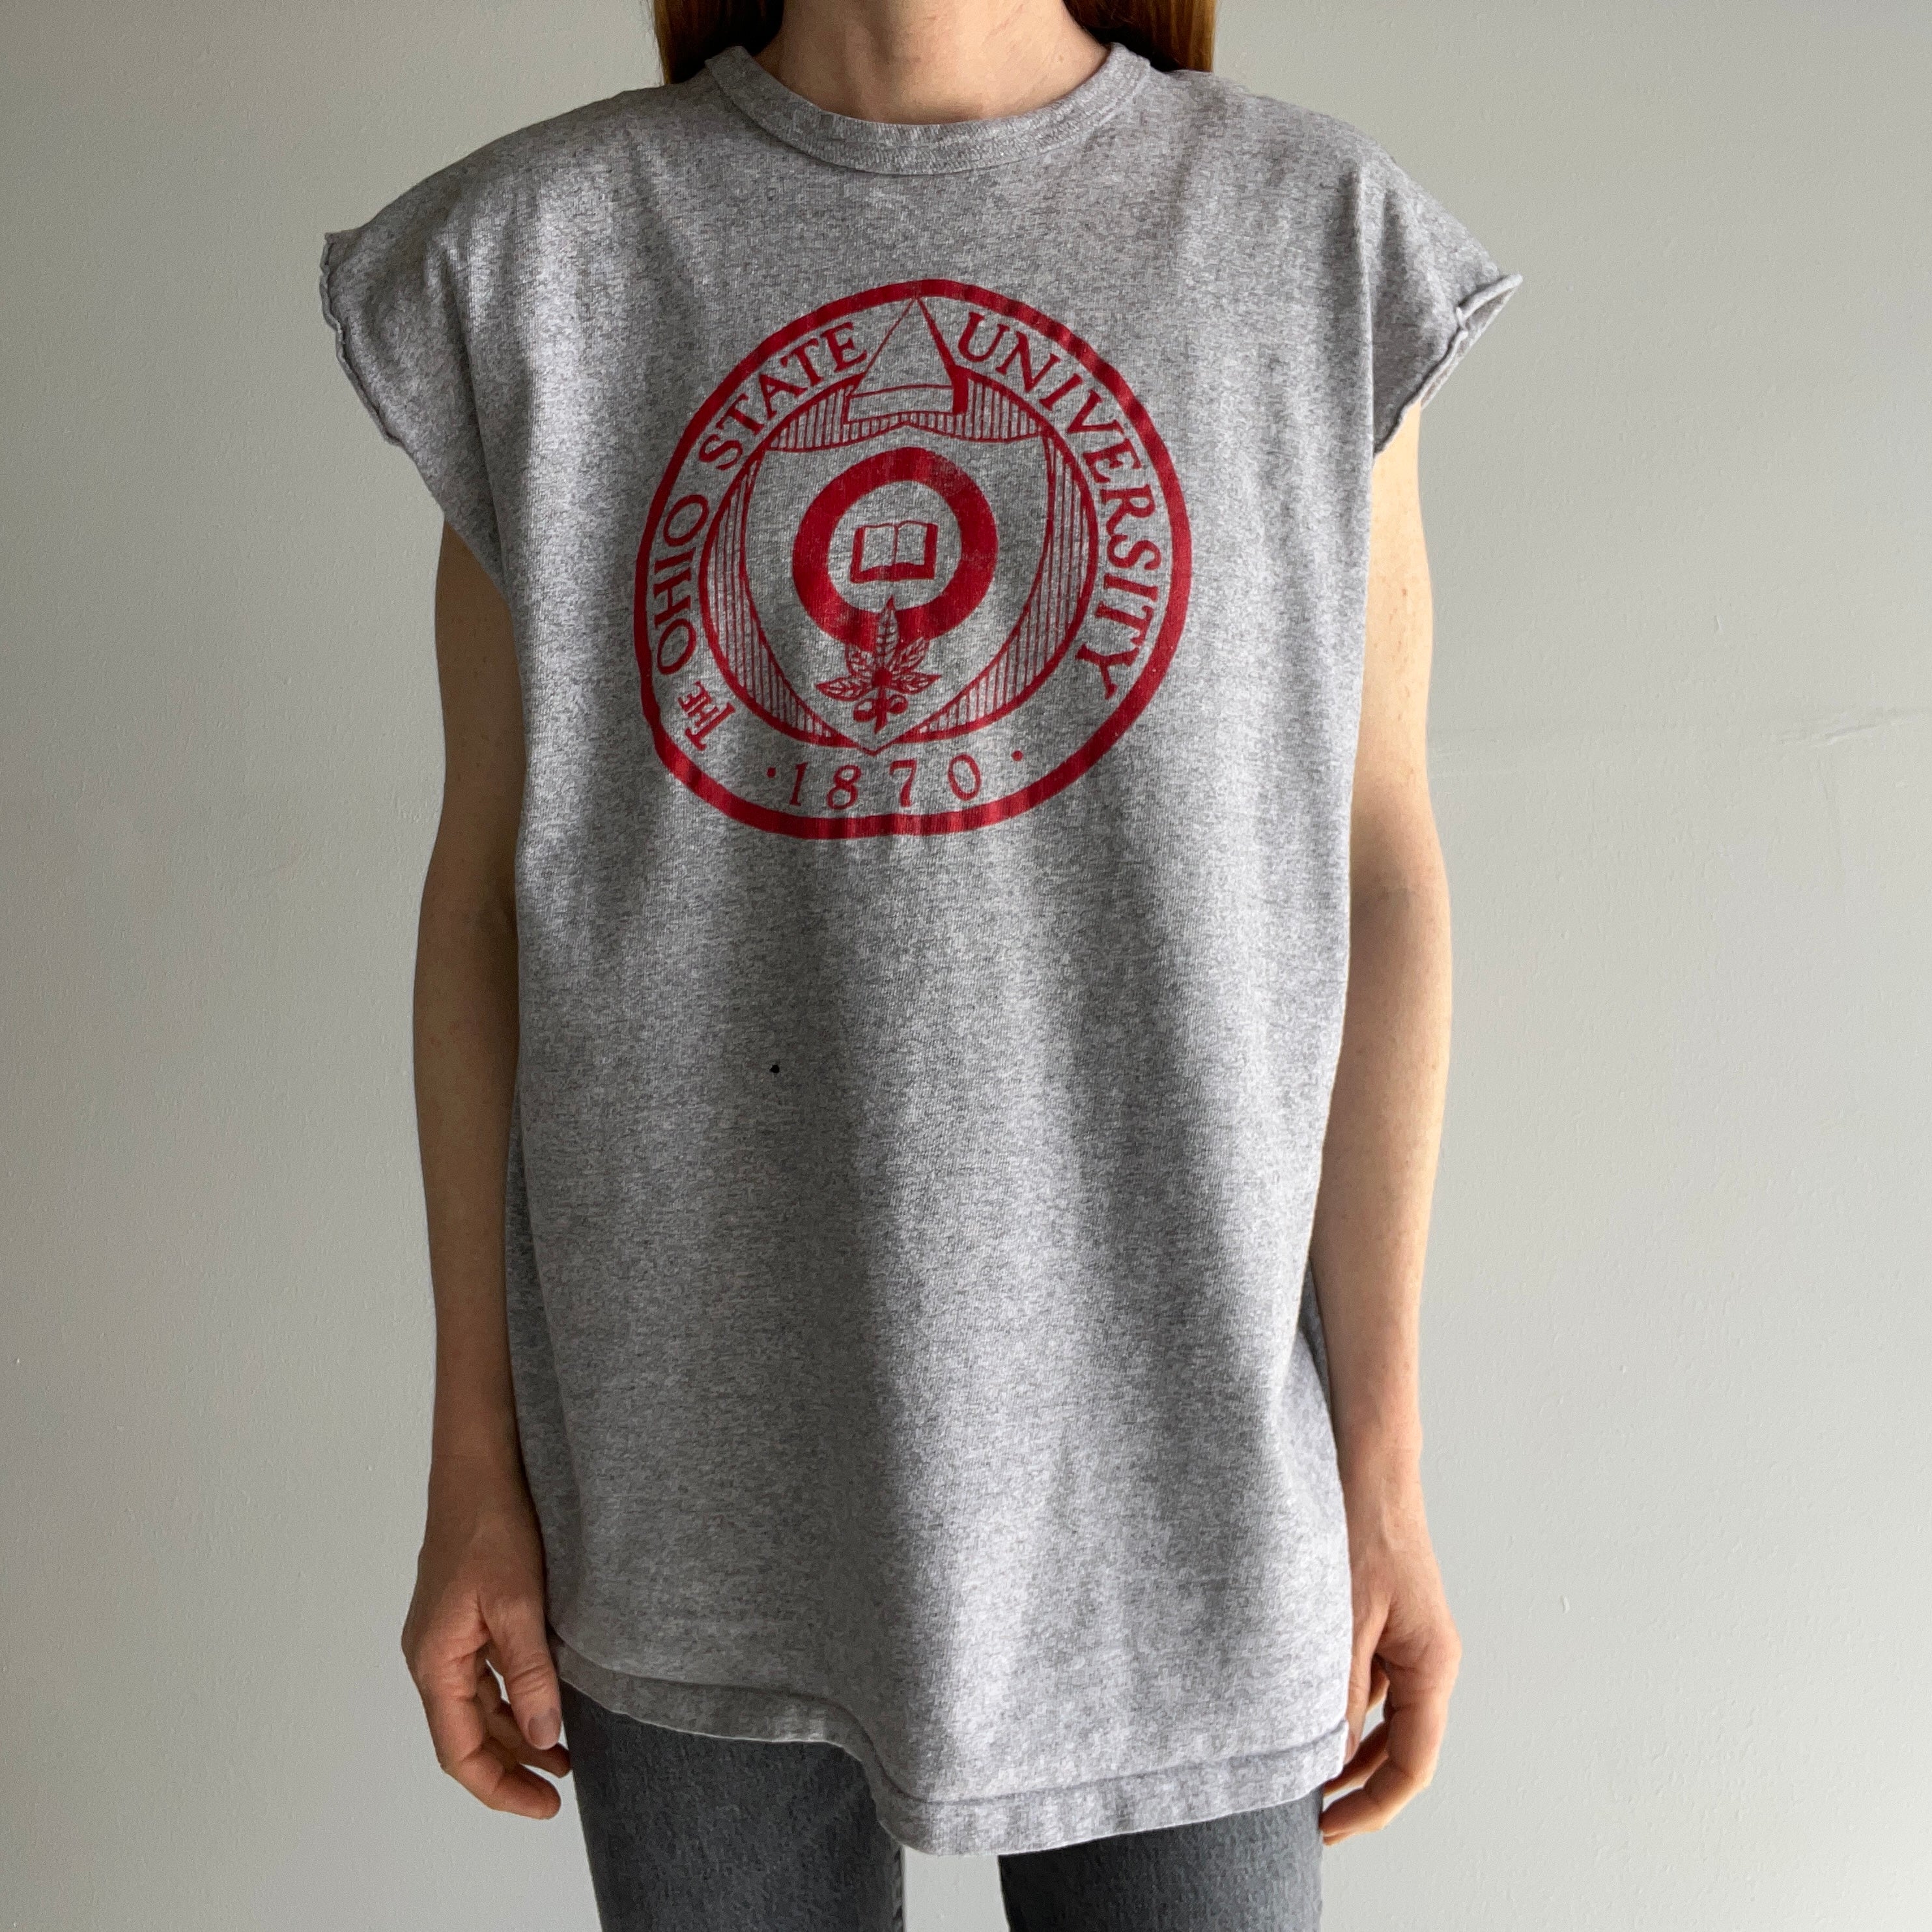 1980s The Ohio State Cut Sleeve T-Shirt by Champion Brand